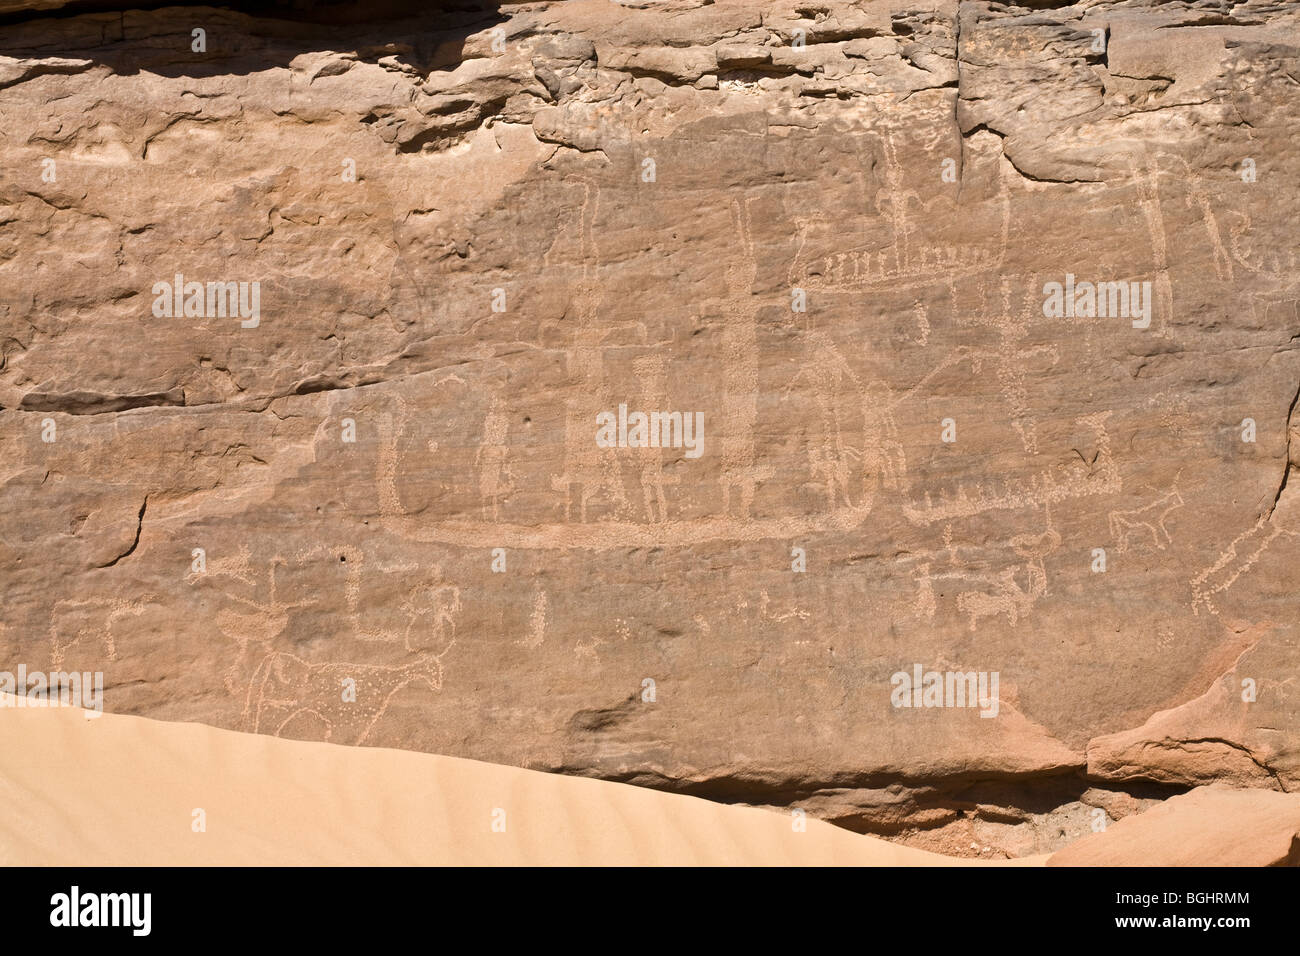 Winklers famous Rock-Art site 26 in Wadi Abu Wasil in the Eastern Desert of Egypt. Stock Photo